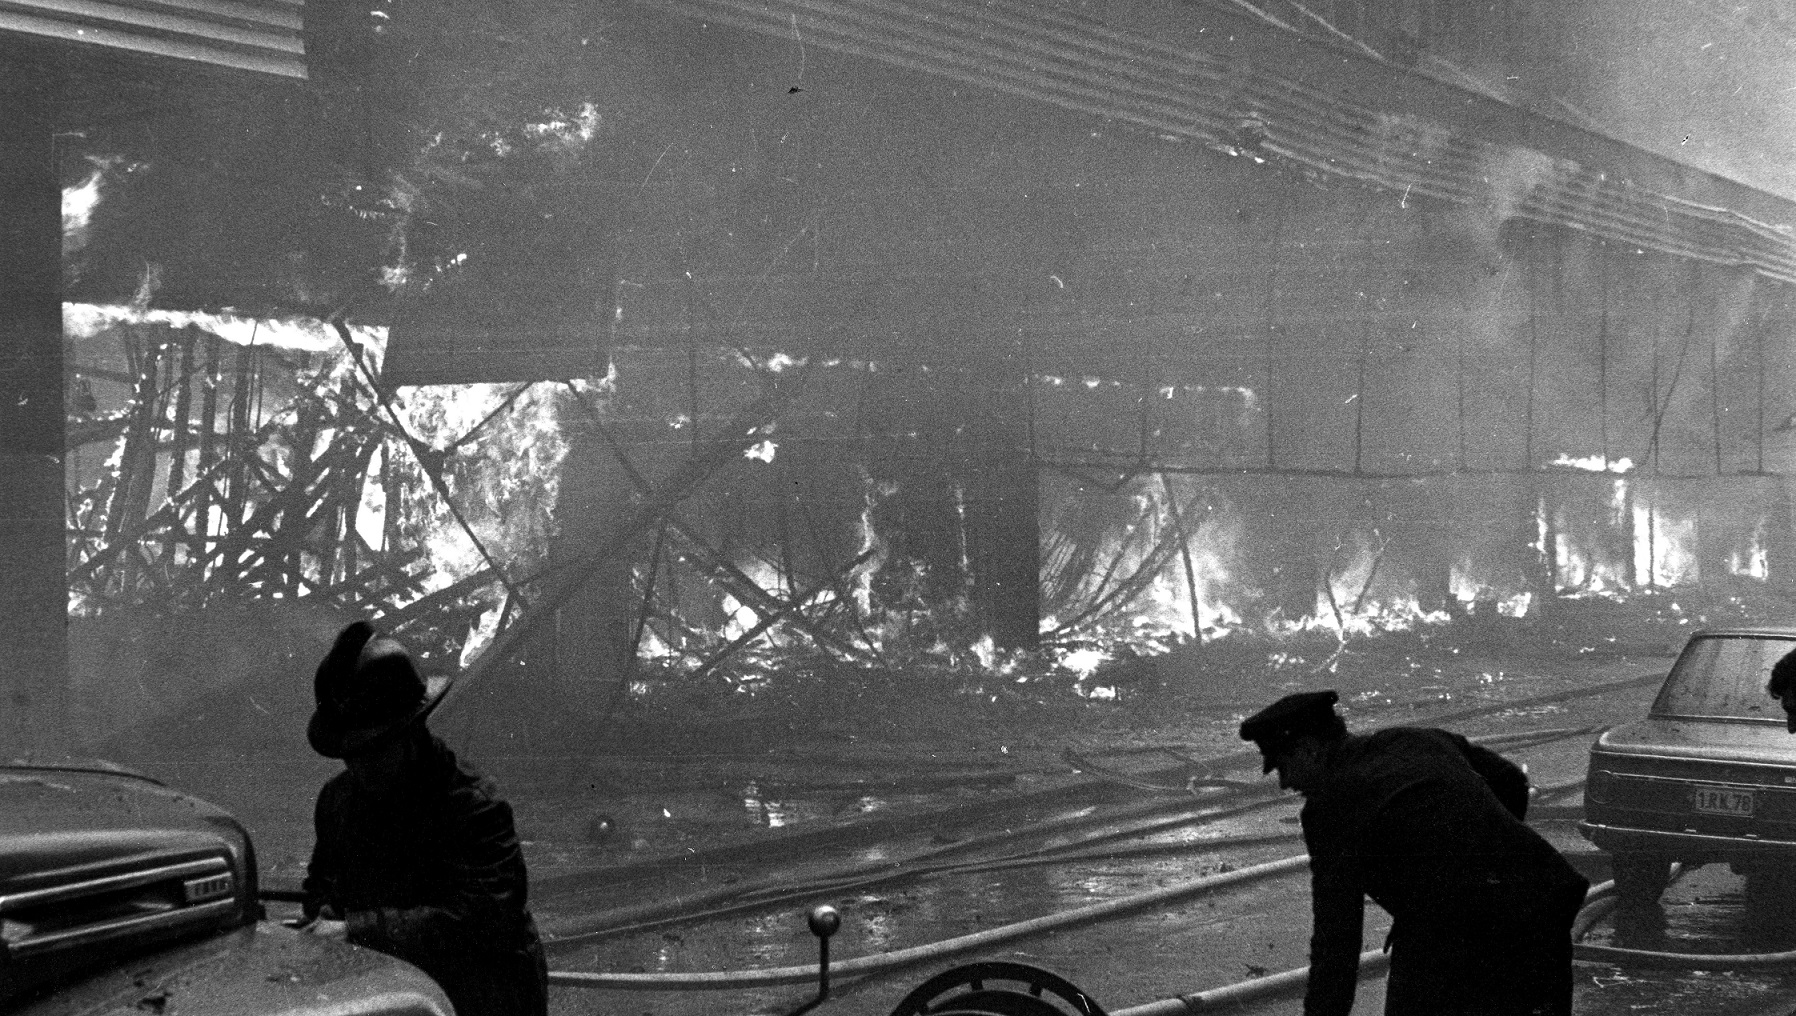 The Innovation department store on fire in 1967